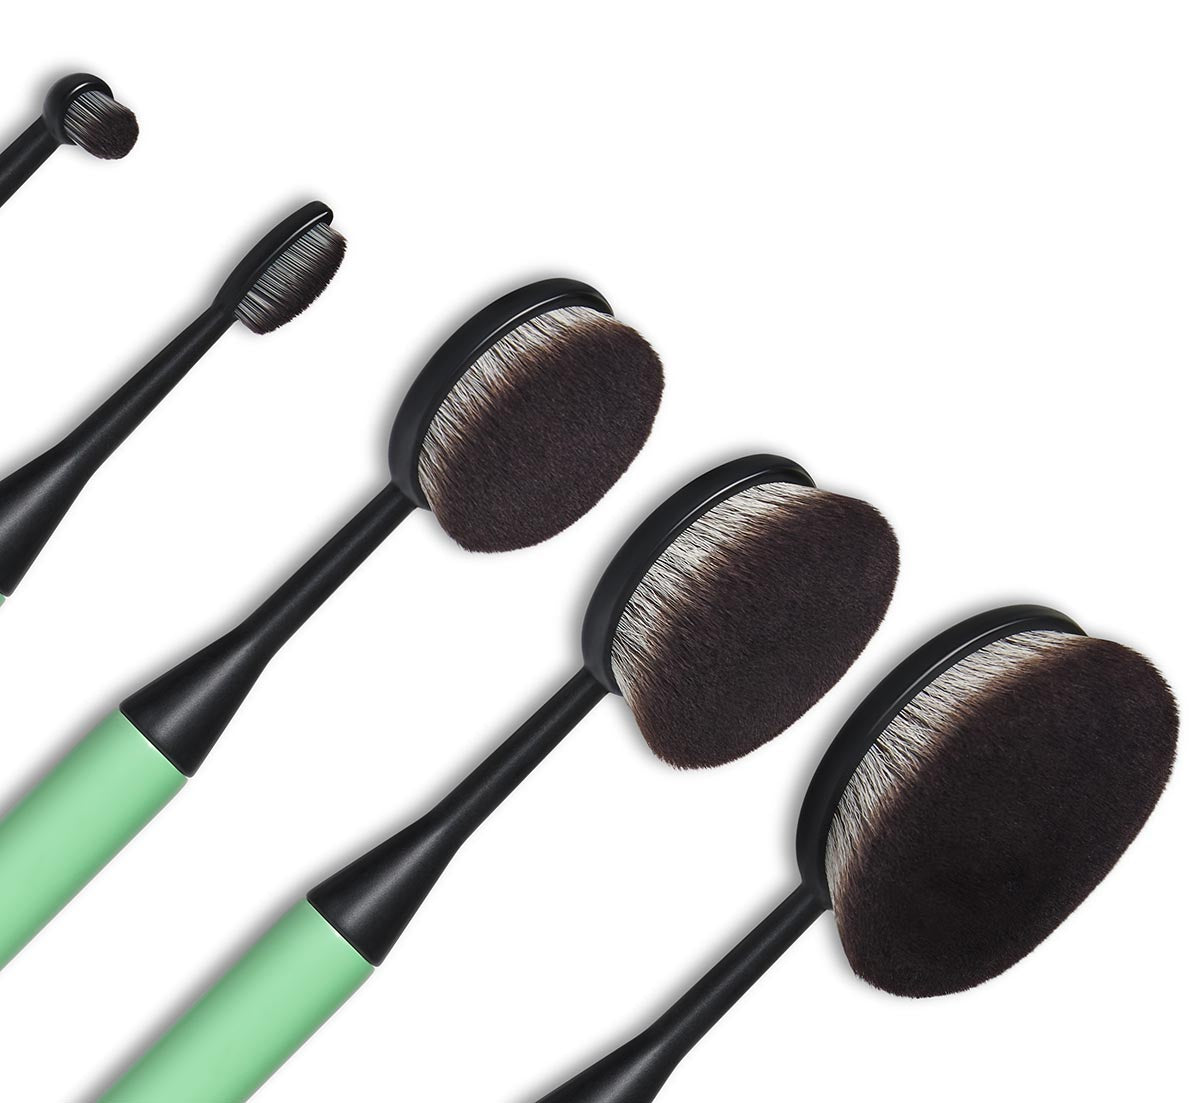 Oval & Round Makeup Brushes